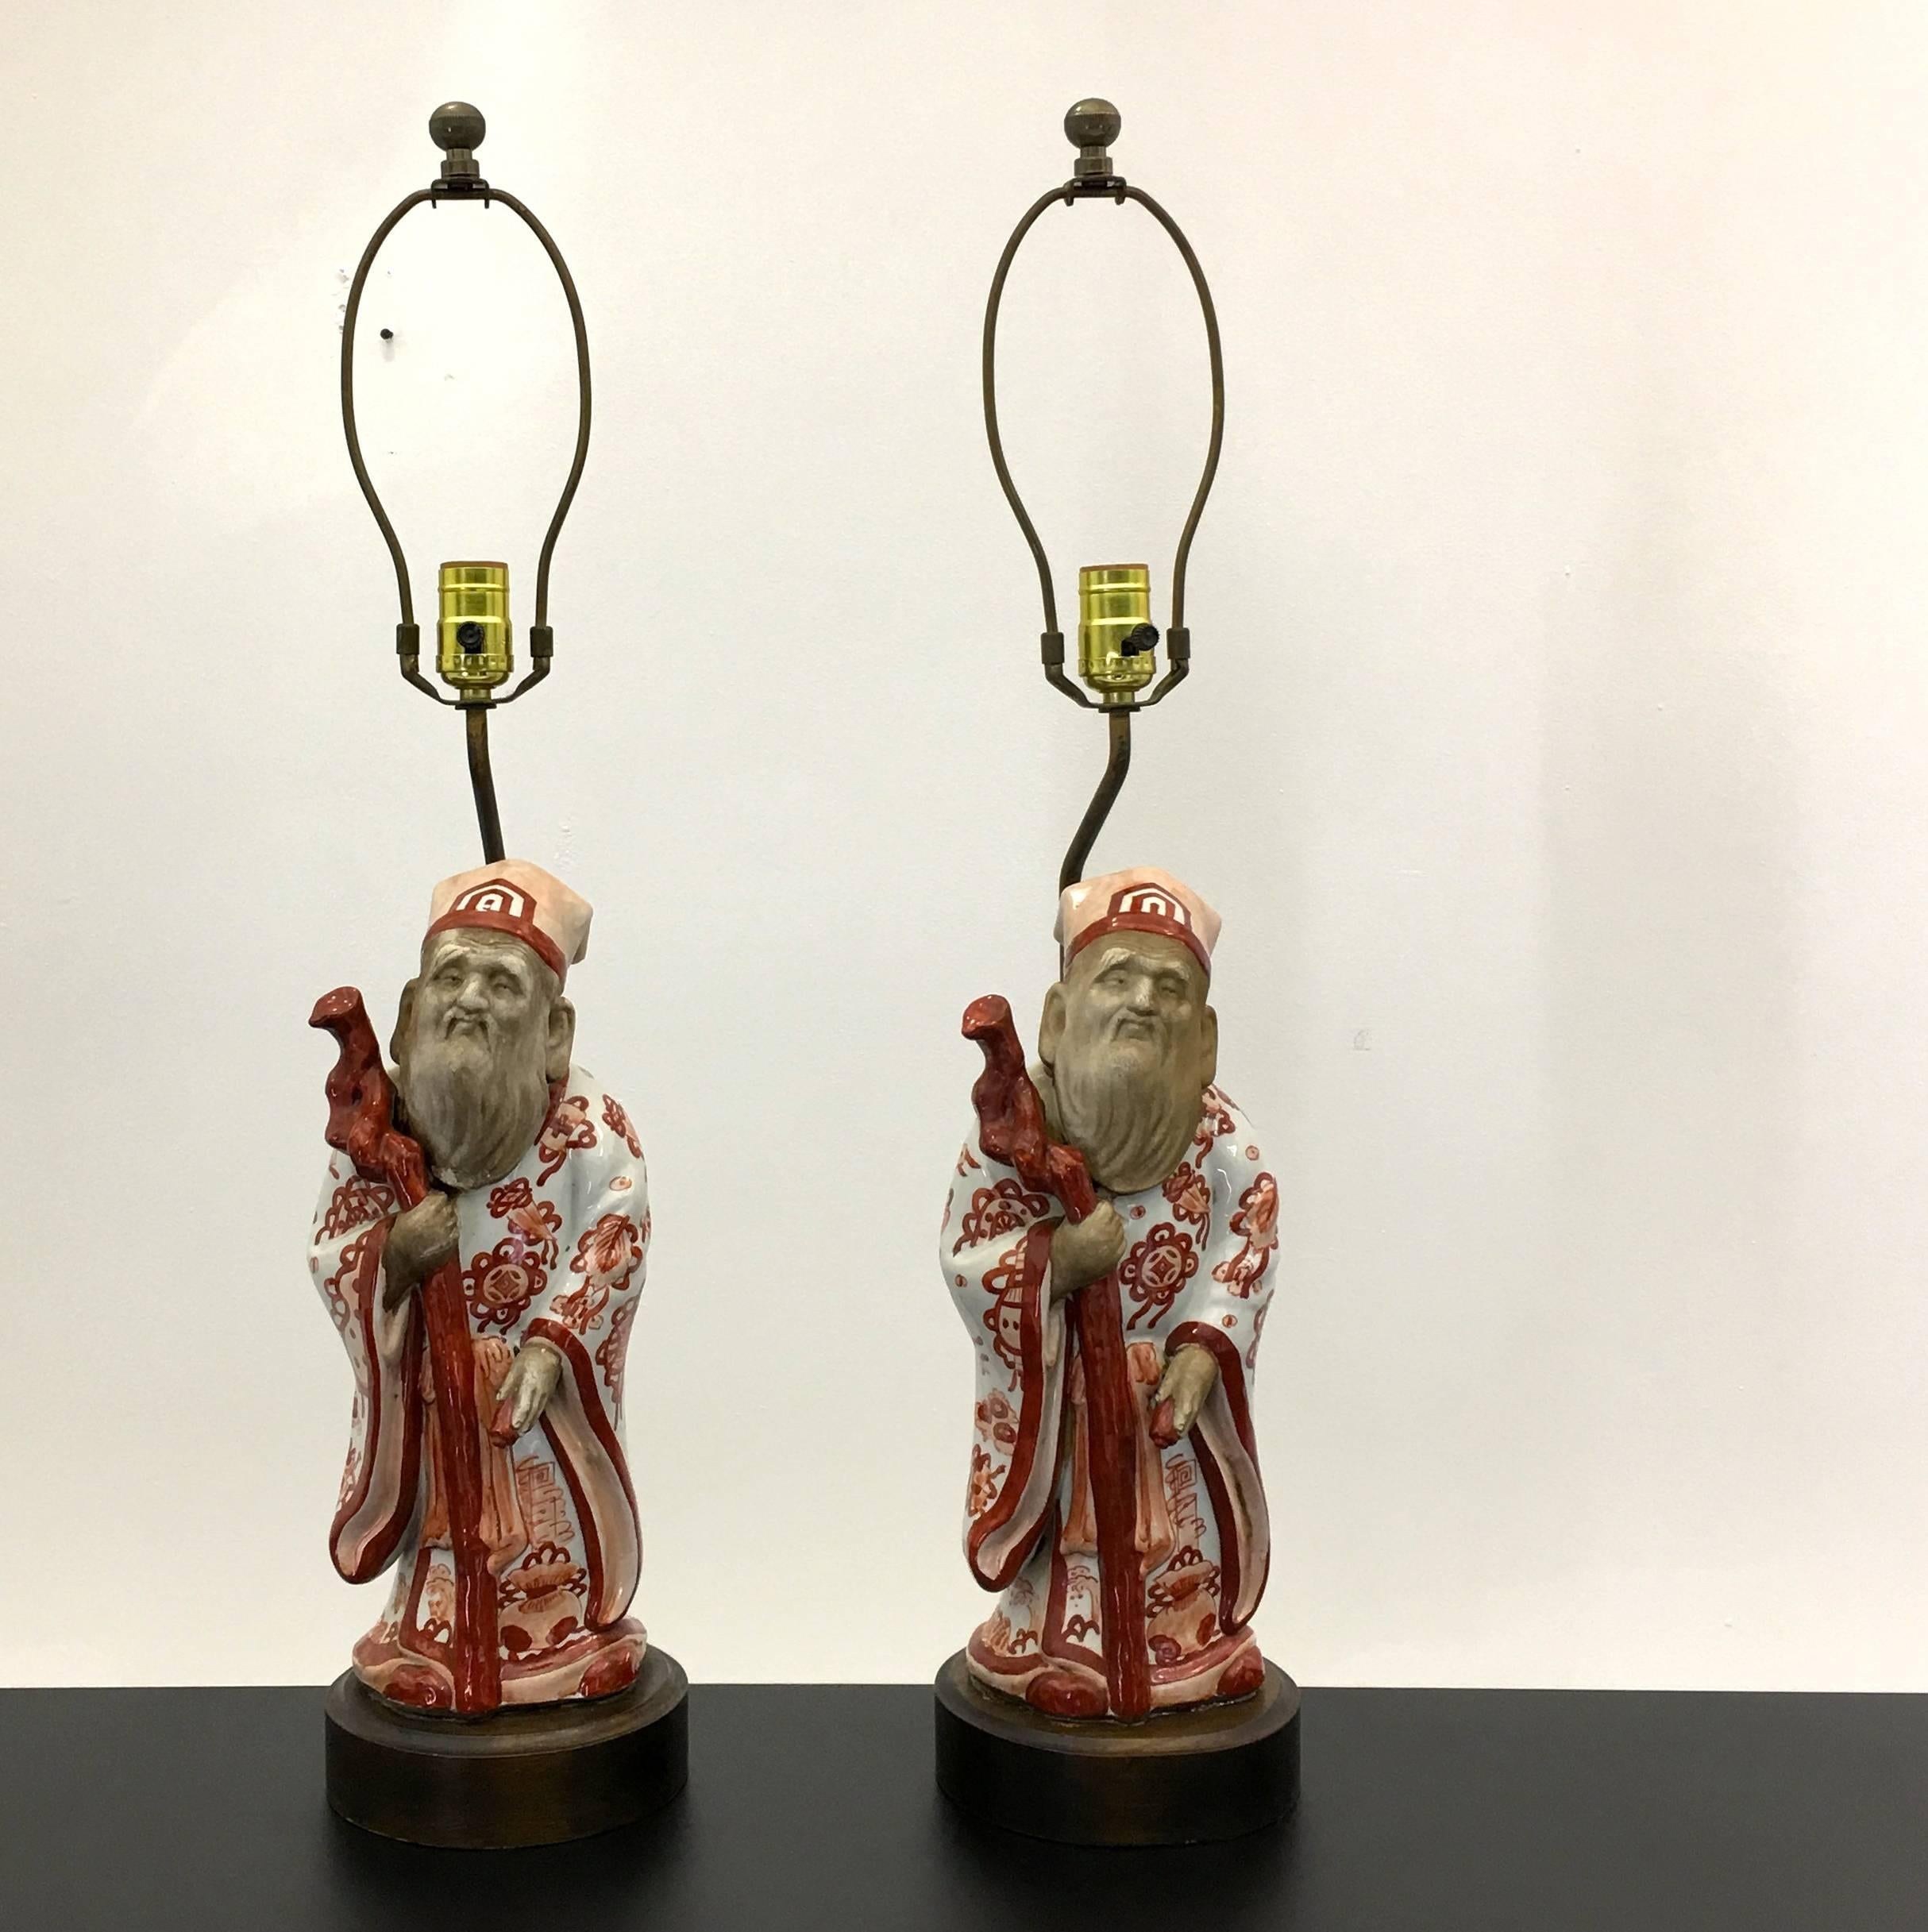 Very fine work by the lighting company Frederick Cooper of Chicago, dated to the early 1950s using hardware imported from Italy, and ceramic statues of oriental Japanese wise men produced in Japan. These statues are mounted to walnut bases with felt